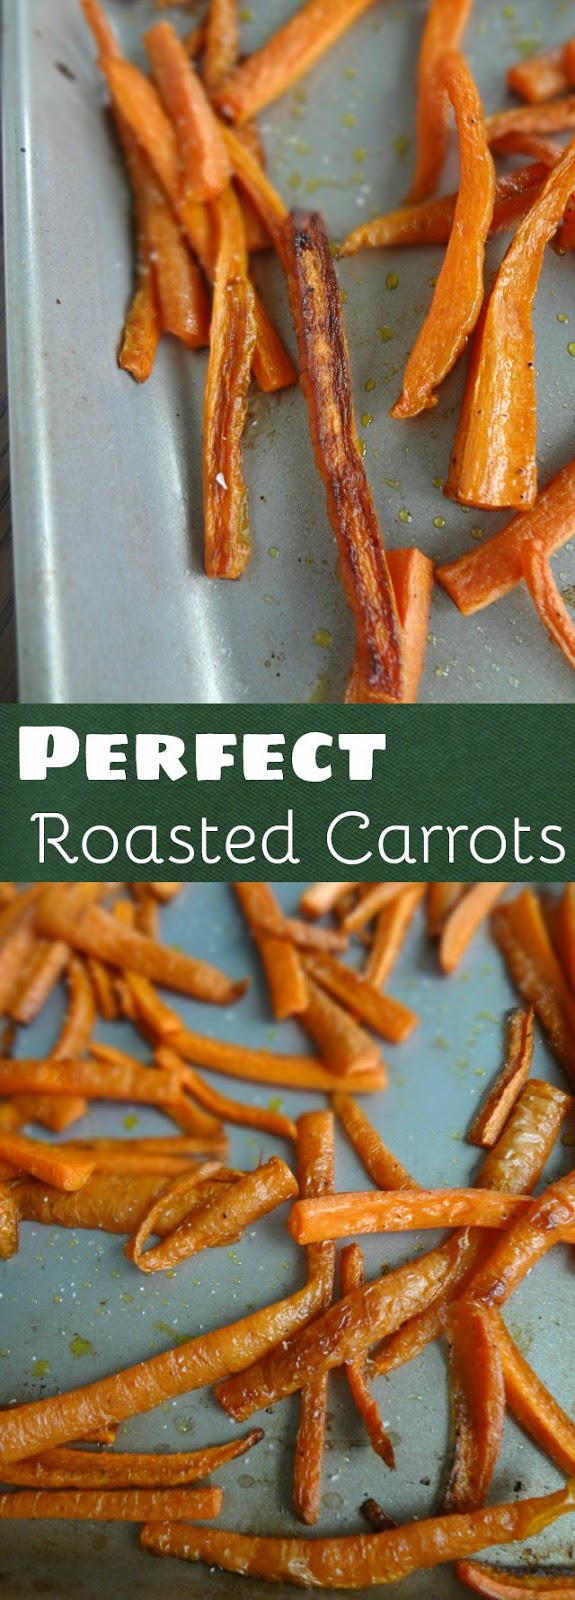 Perfect Roasted Carrots